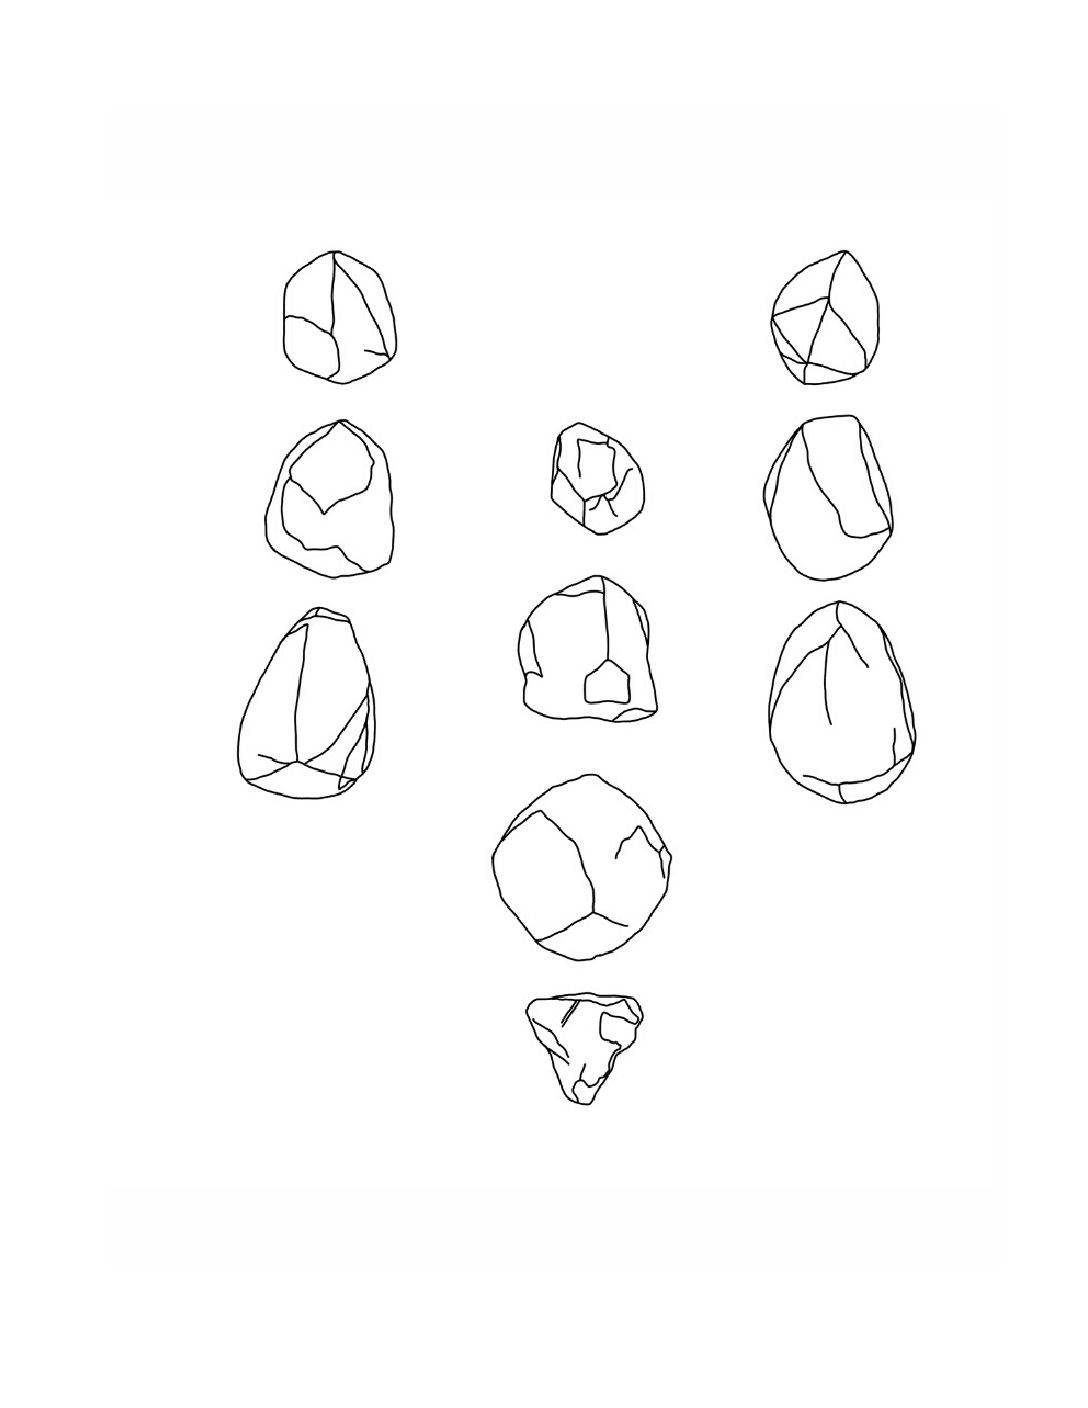 Print and download green rough coloring page â rough diamond world